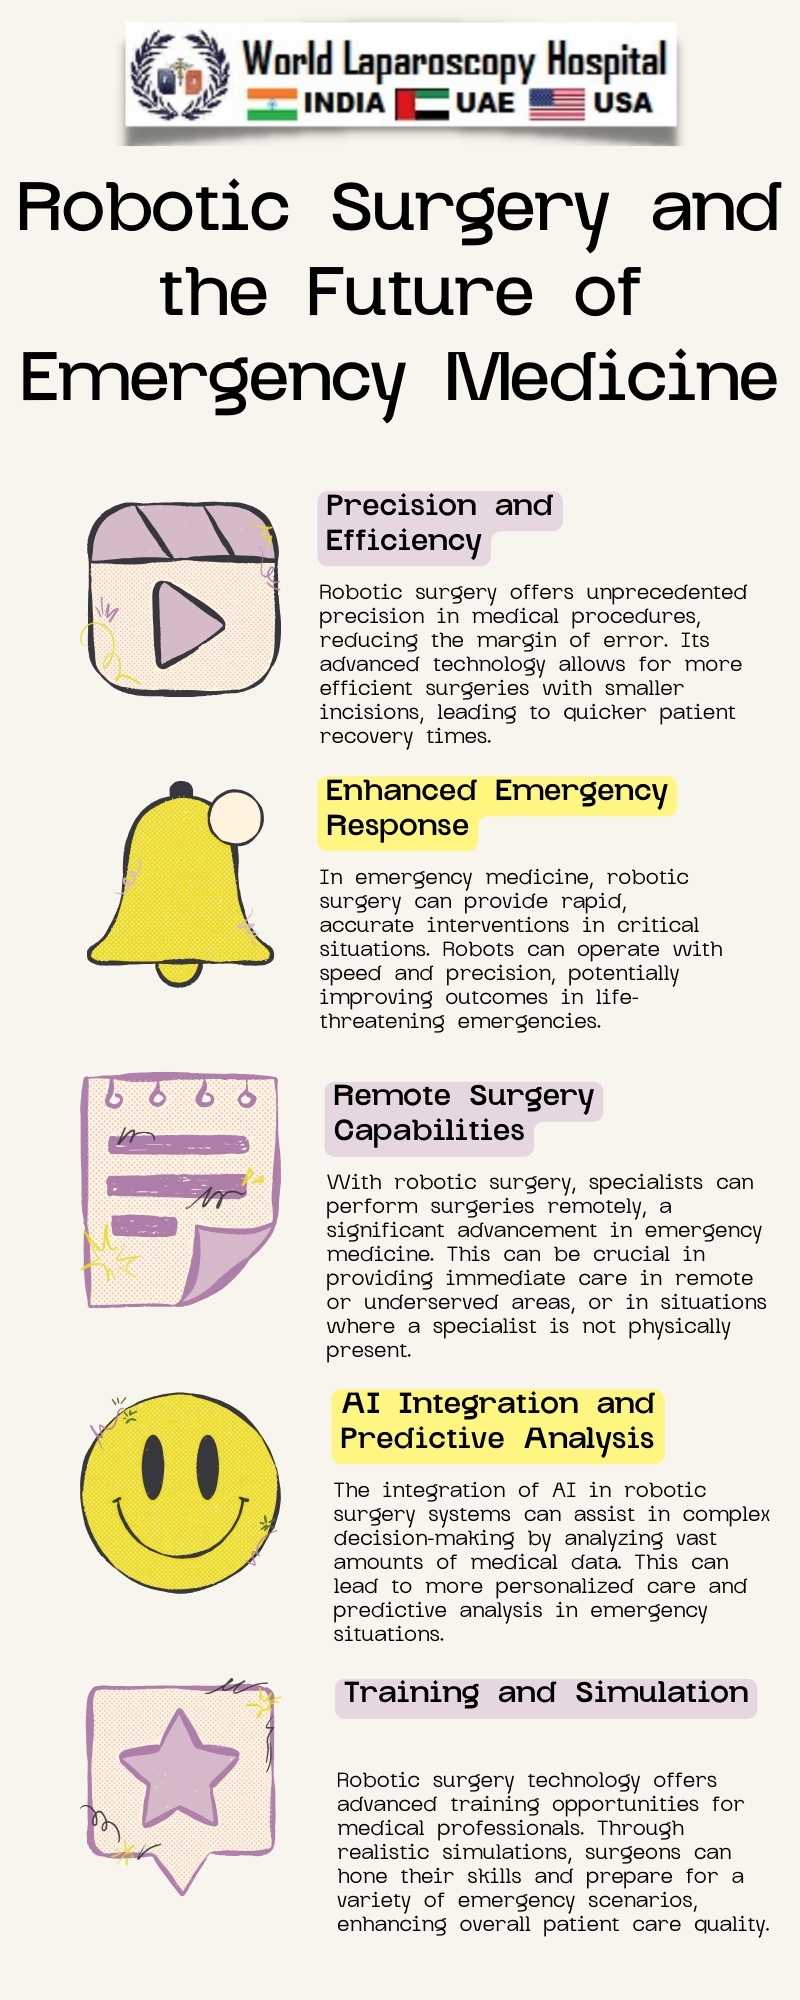 Robotic Surgery and the Future of Emergency Medicine